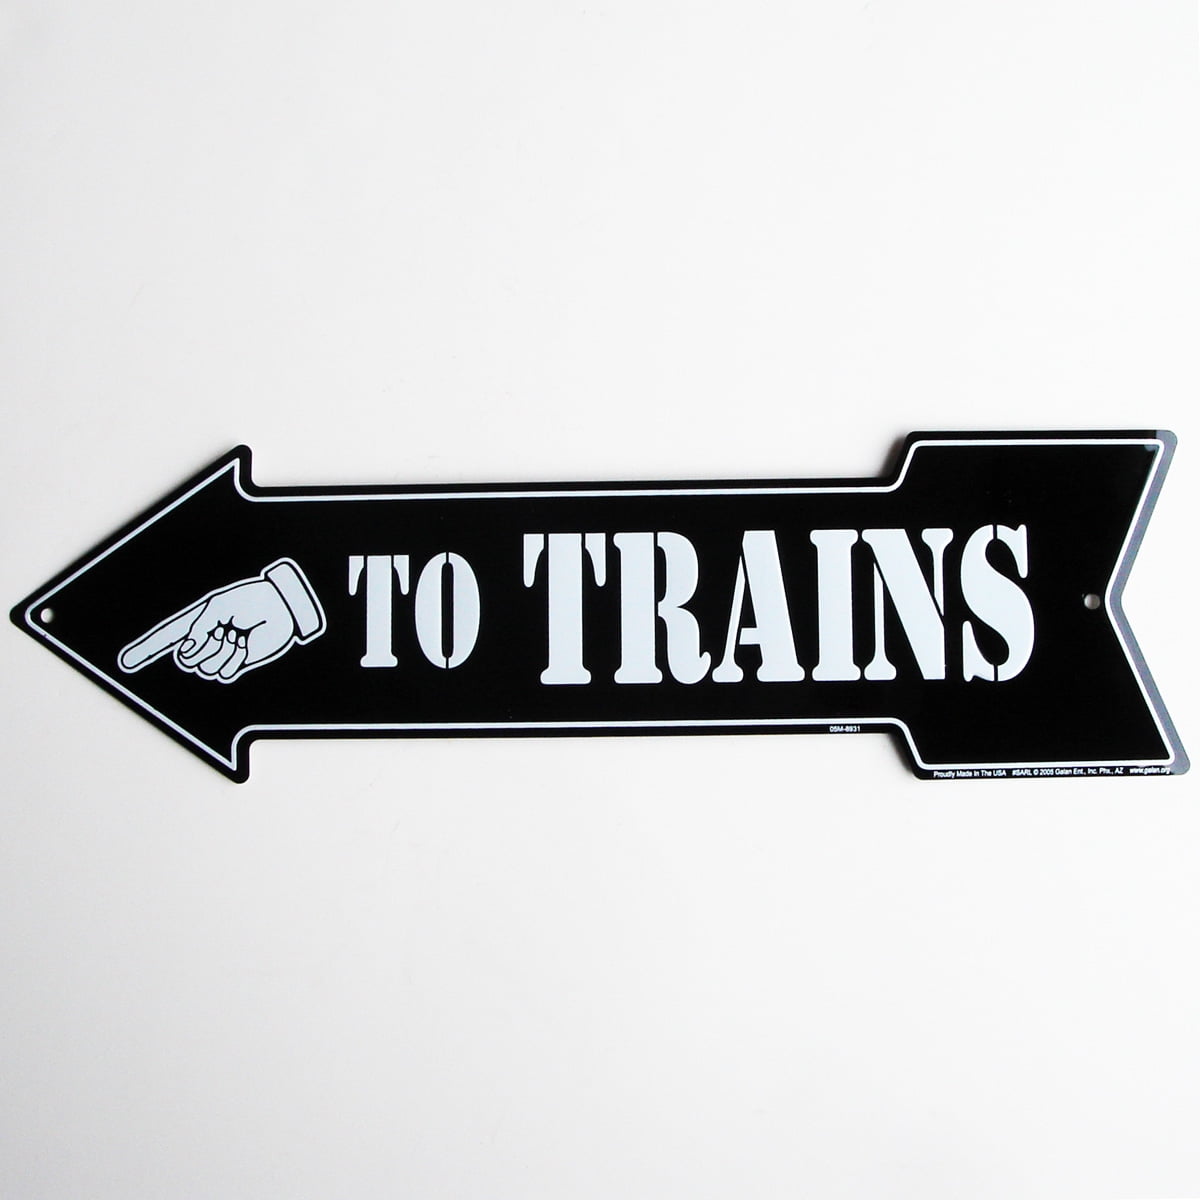 great gift idea A Shed workshop train room sign 'TO THE TRAINS' 